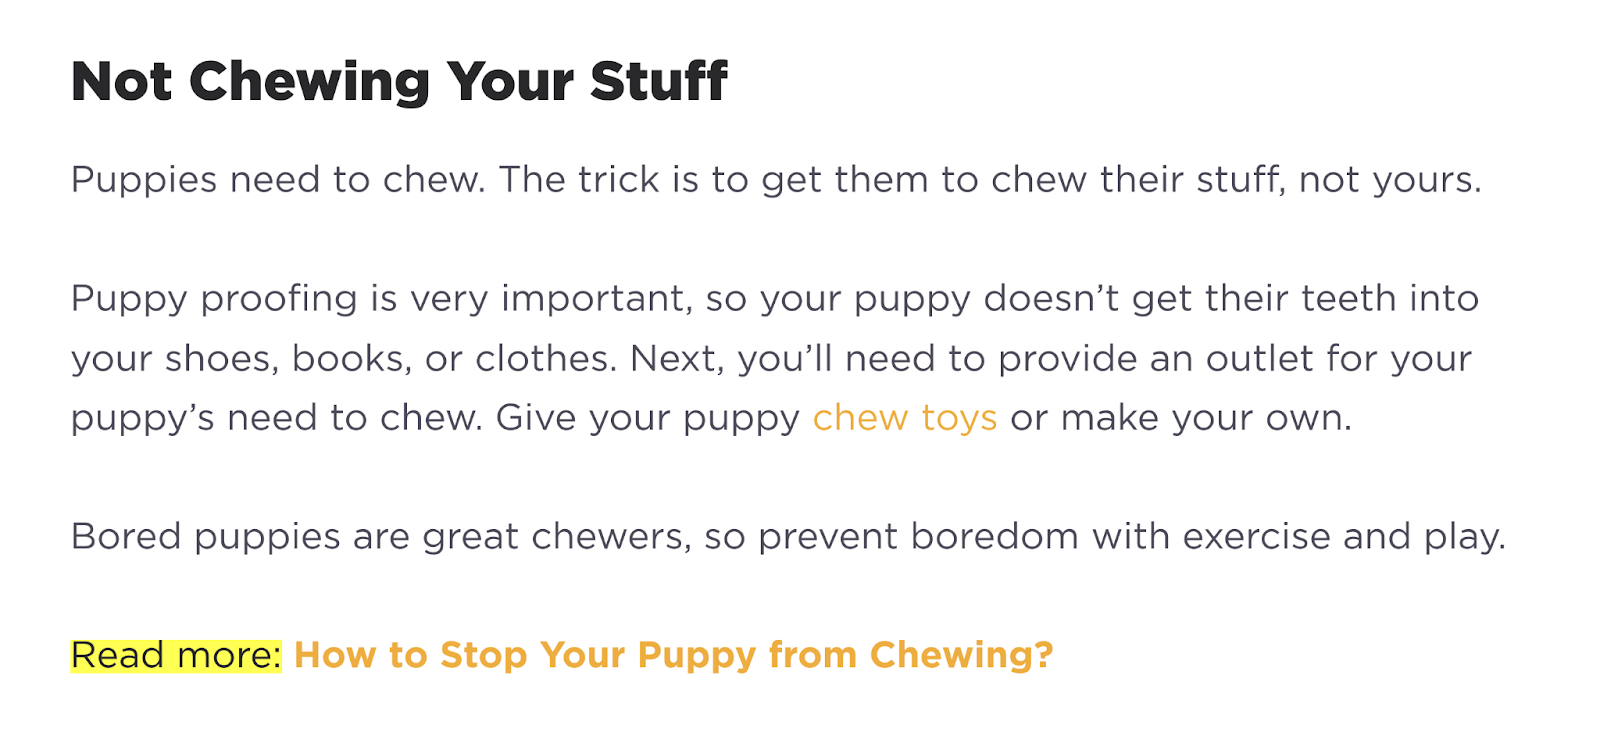  How to Stop Your Puppy from Chewing" extremity  of conception  successful  Petcube's guide